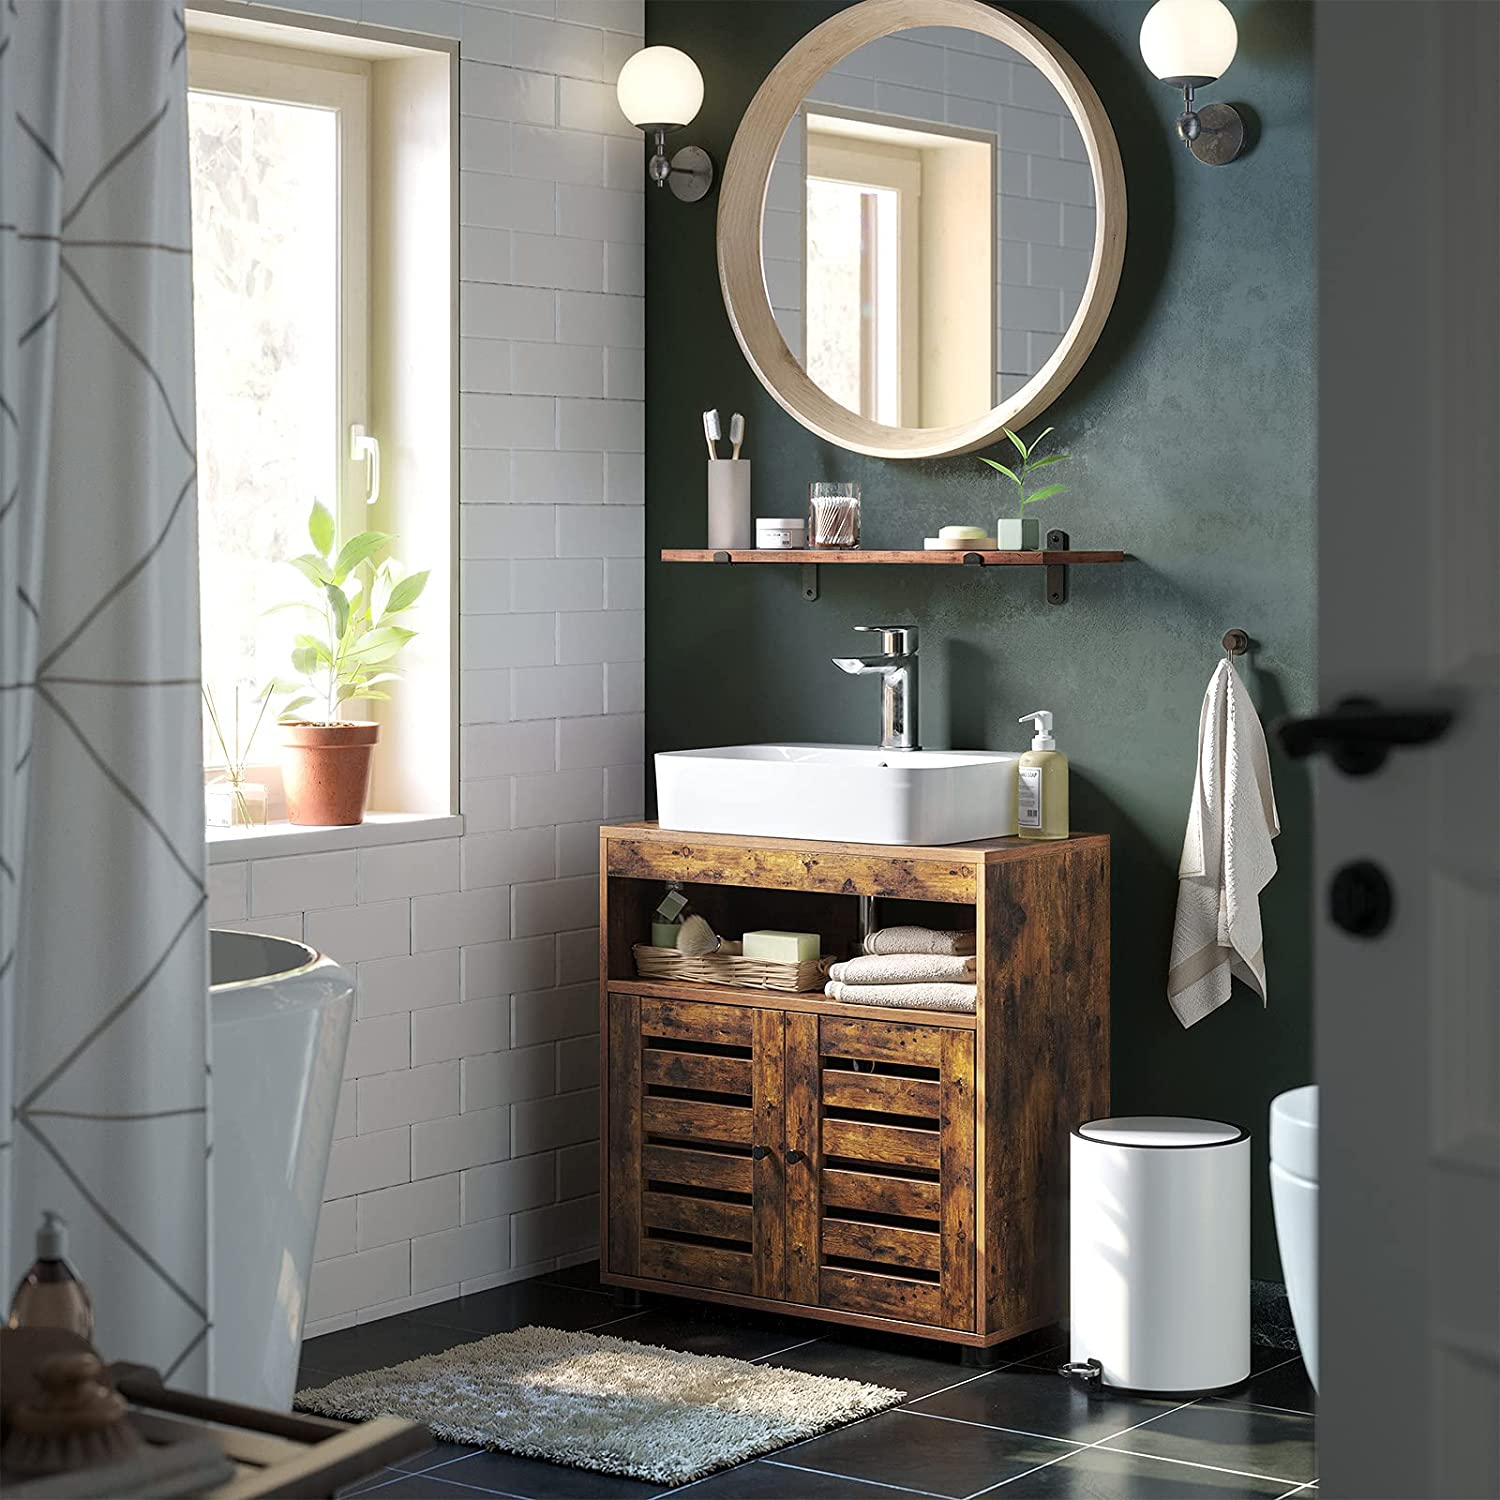 Nancy's Gaboury Bathroom Furniture - Vanity Unit - Cutout - Open Compartment - French Doors - Industrial - Brown - Black - Engineered Wood - 60 x 30 x 63 cm 